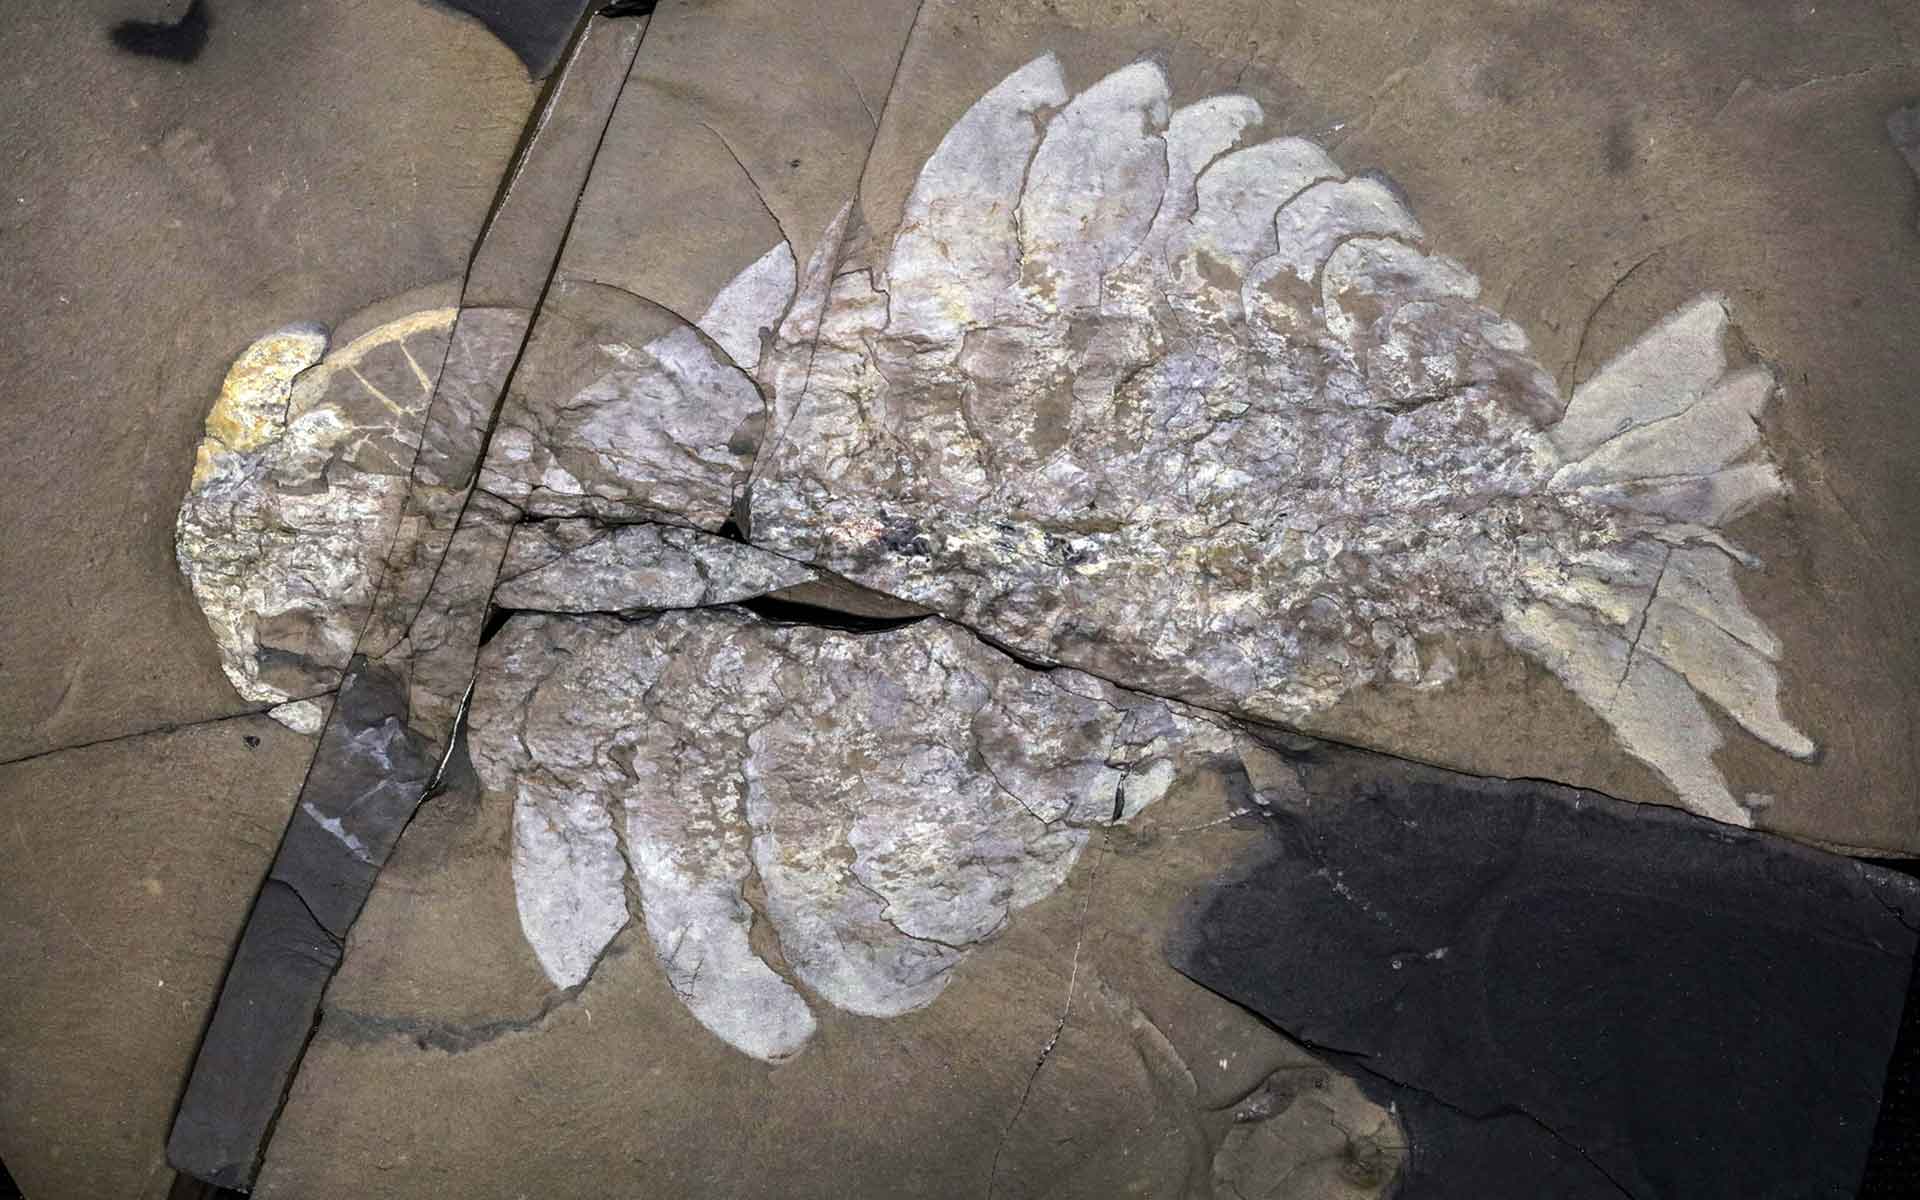 Anomalocaris canadensis from the Burgess Shale